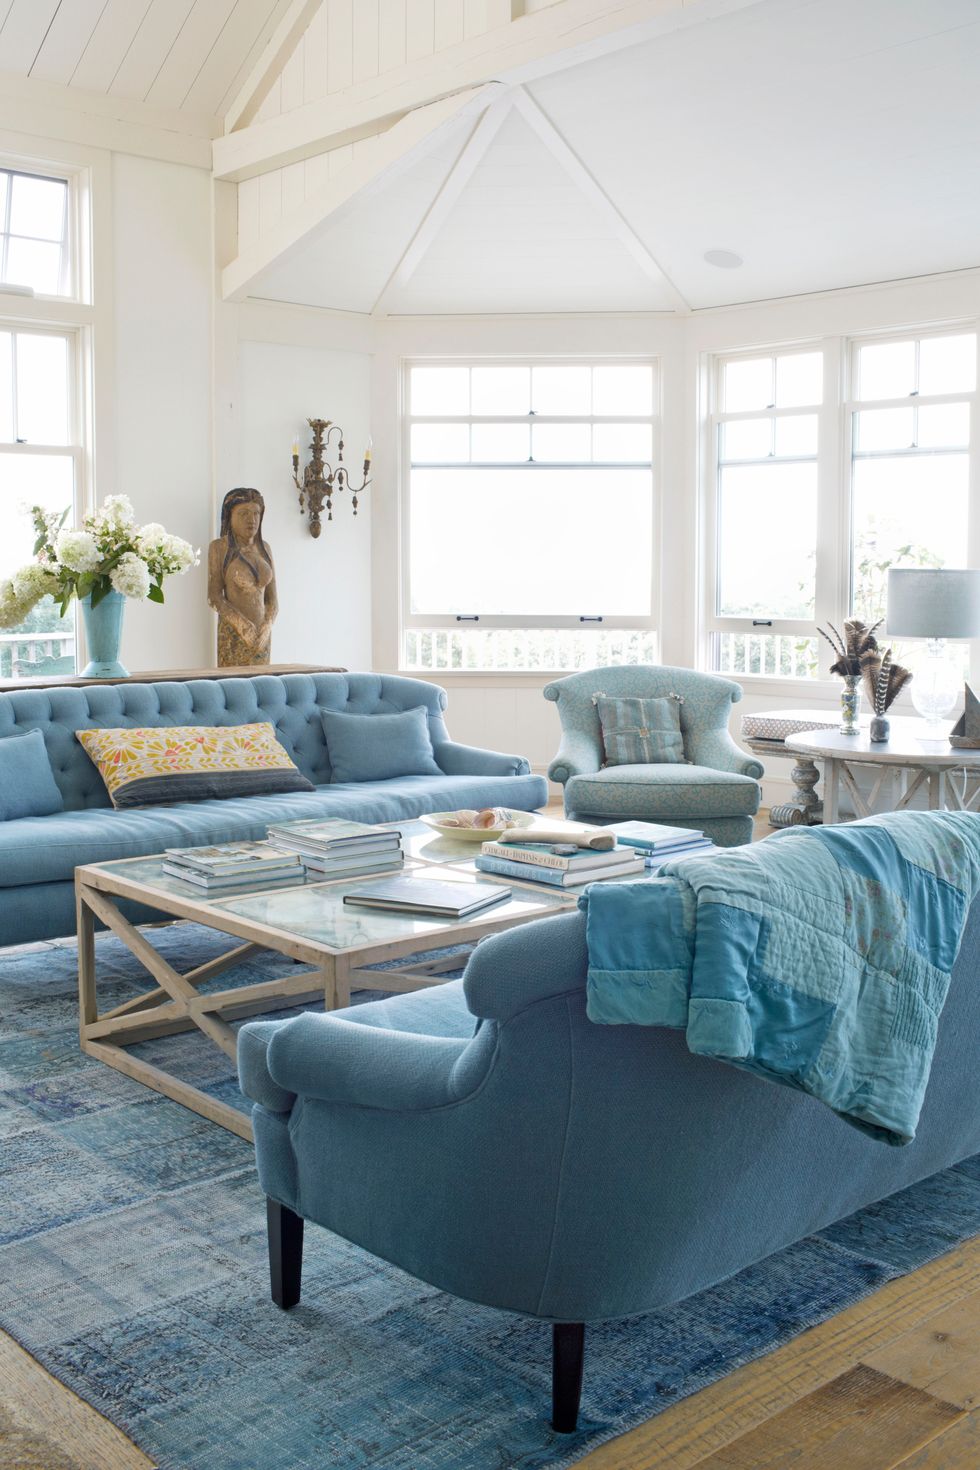 17 Ways to Decorate With Light Blue in a Bedroom